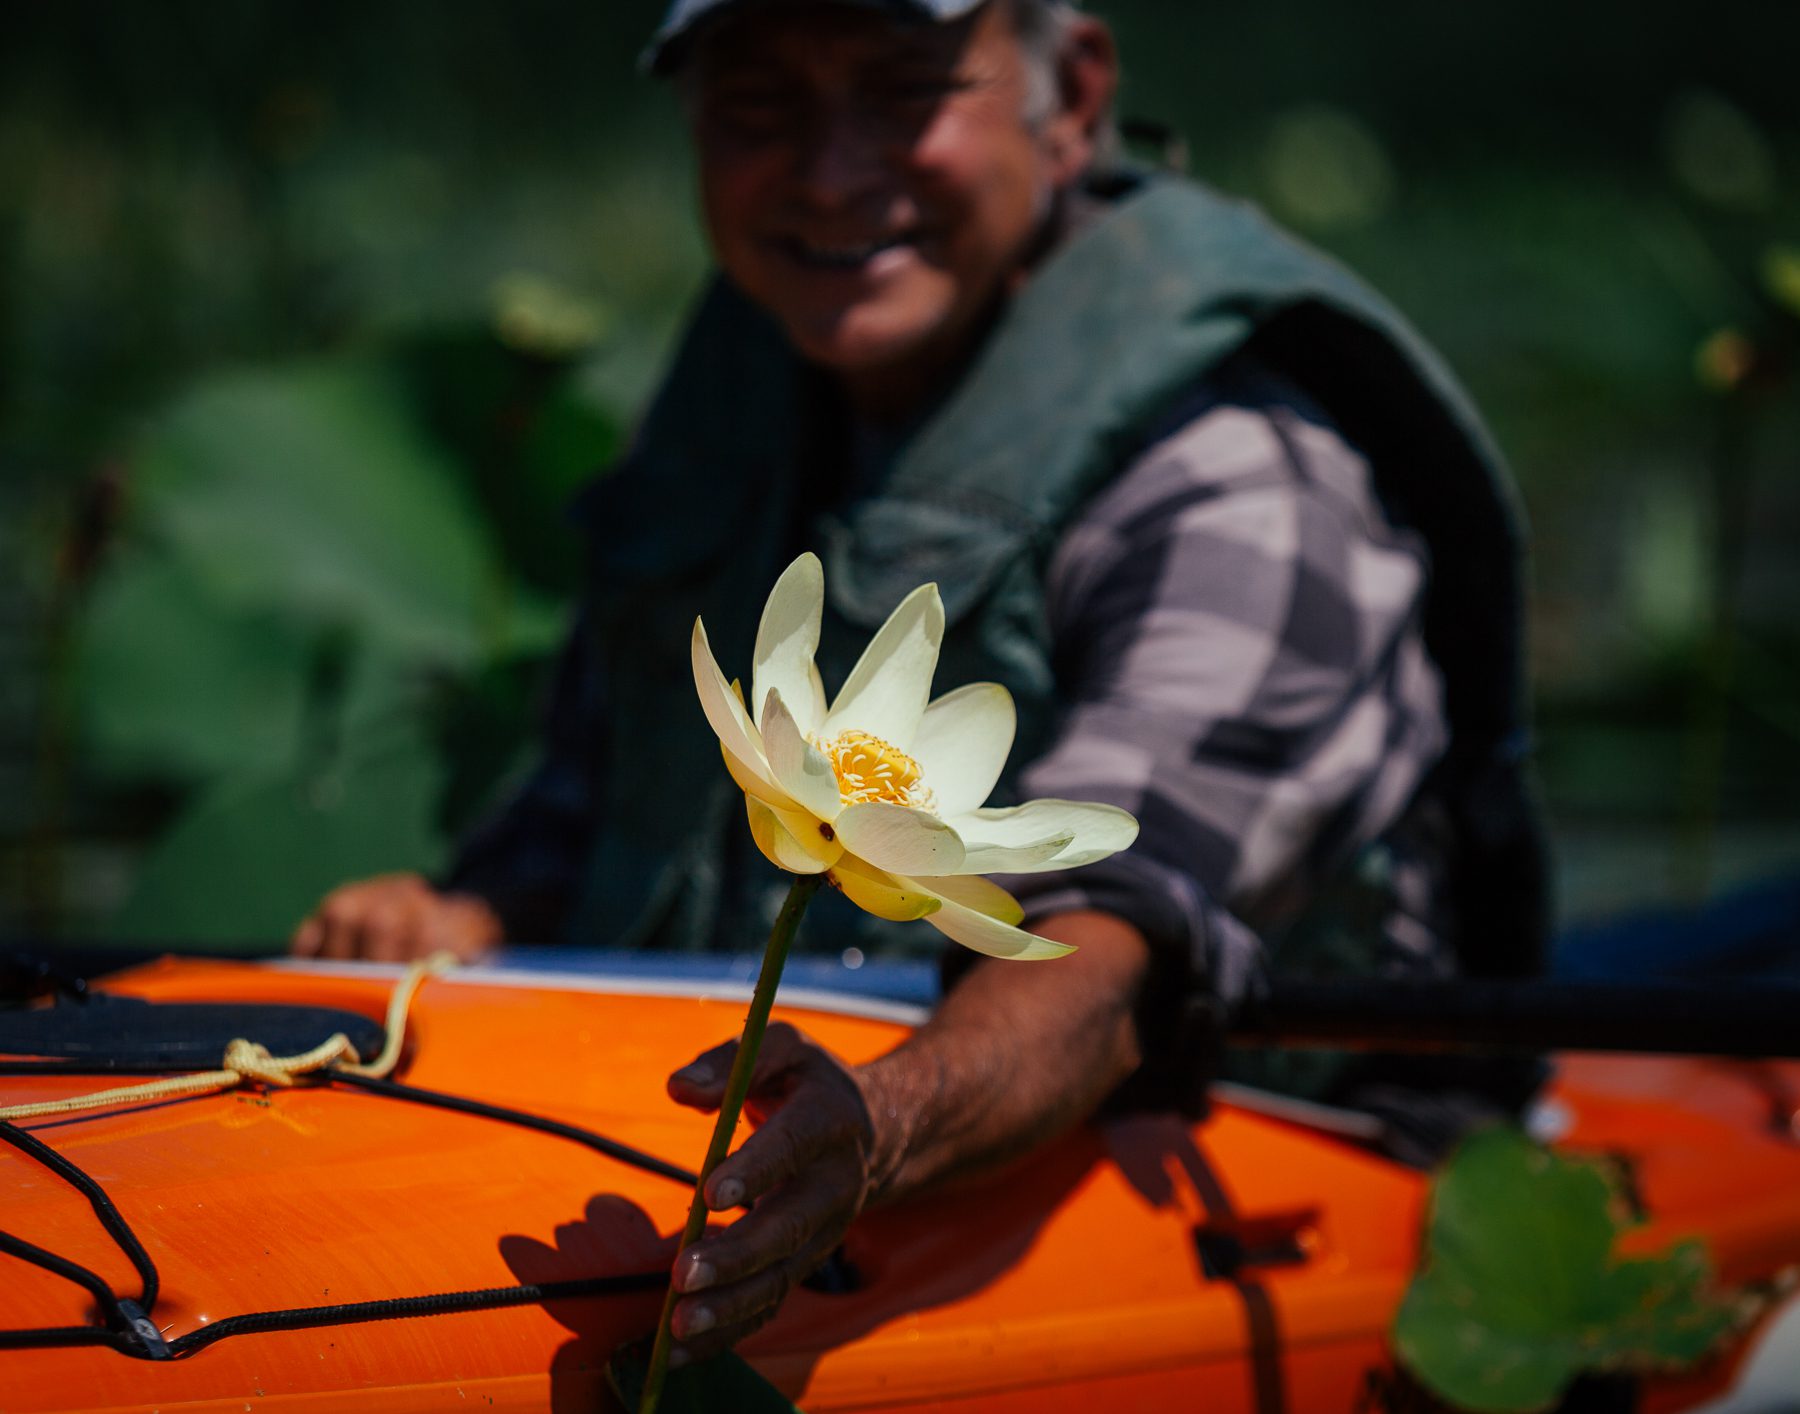 Ken with a giant yellow lotus (Nelumbo lutea). Ken explains how their range was originally from Virginia and Carolinas. Their roots were a food item amongst indigenous people, and the flower also happened to look neat. The seeds are incredibly hard and can last for decades, making them a great commodity to trade. Because of trade, over hundreds of years, they migrated north via trade routes. 